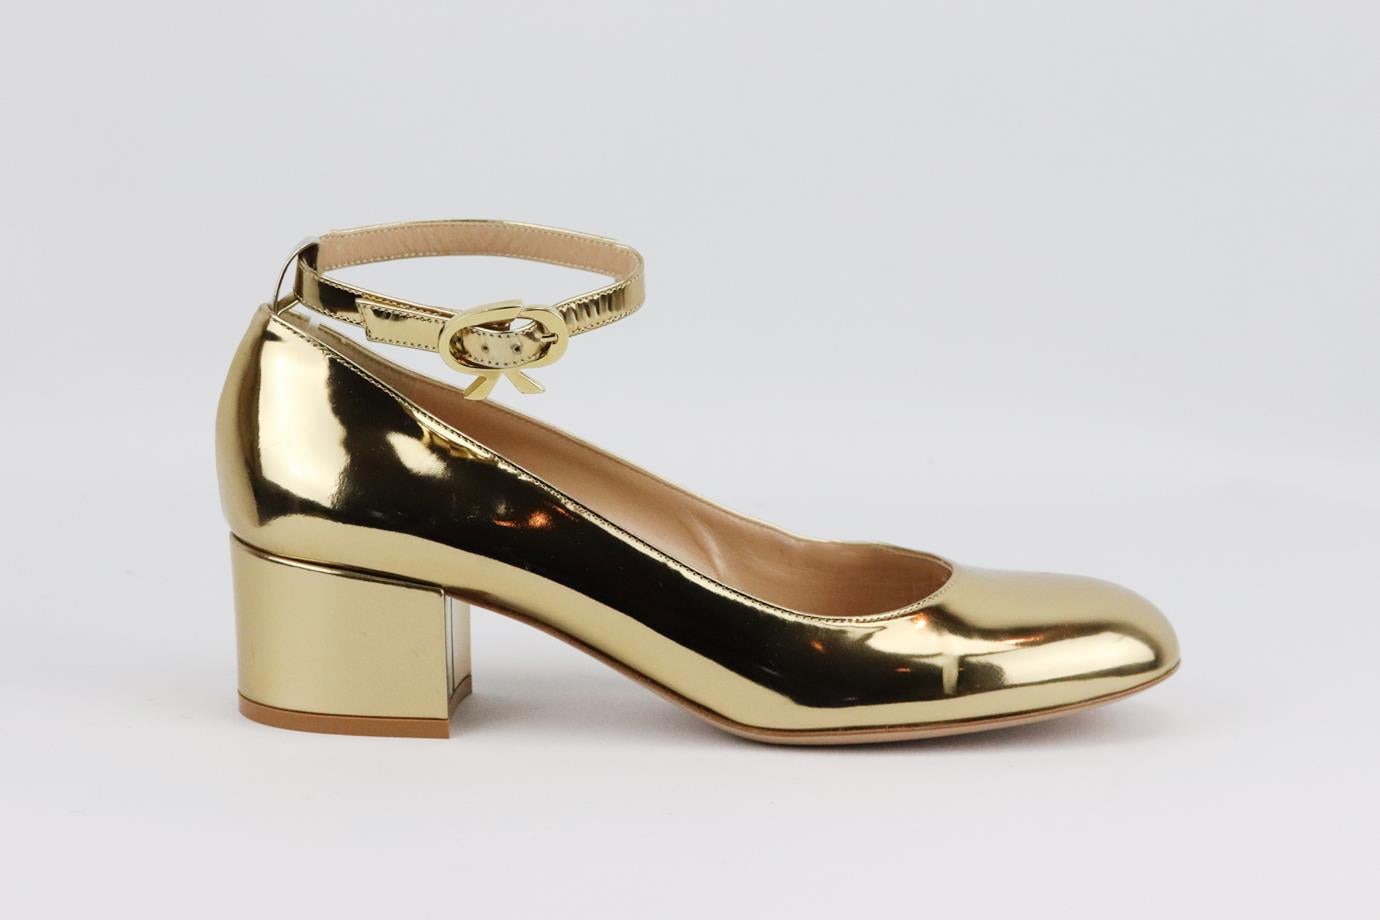 Gianvito Rossi metallic patent leather pumps. Gold. Buckle fastening at side. Does not come with box or dustbag. Size: EU 40 (UK 7, US 10). Insole: 10.4 in. Heel: 1.8 in
